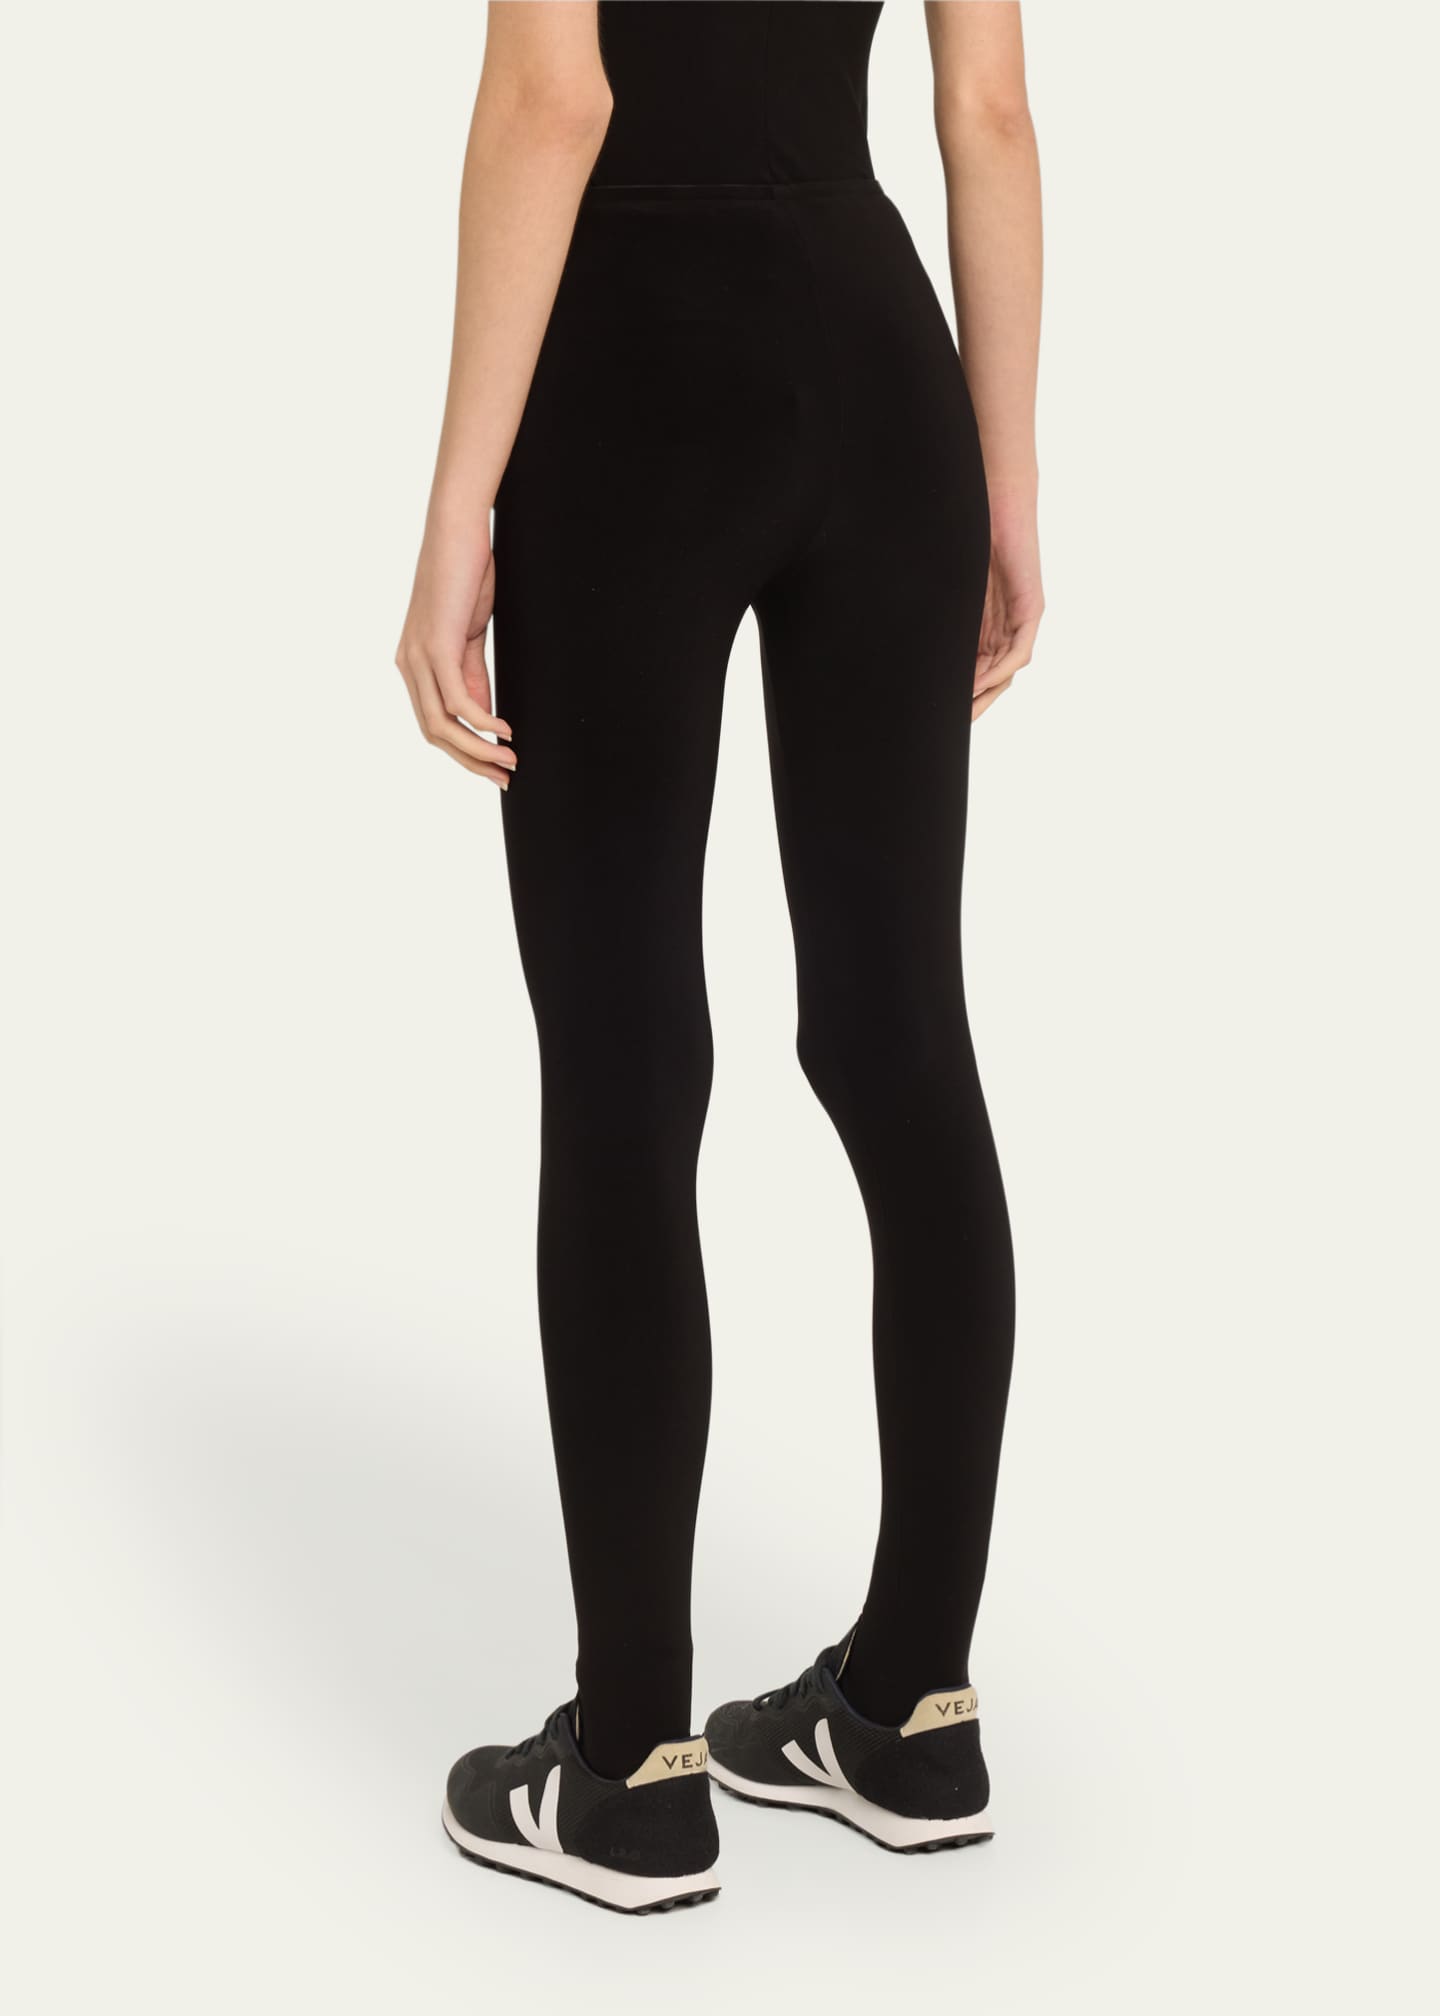 Norma Kamali Footie Leggings without Waistband